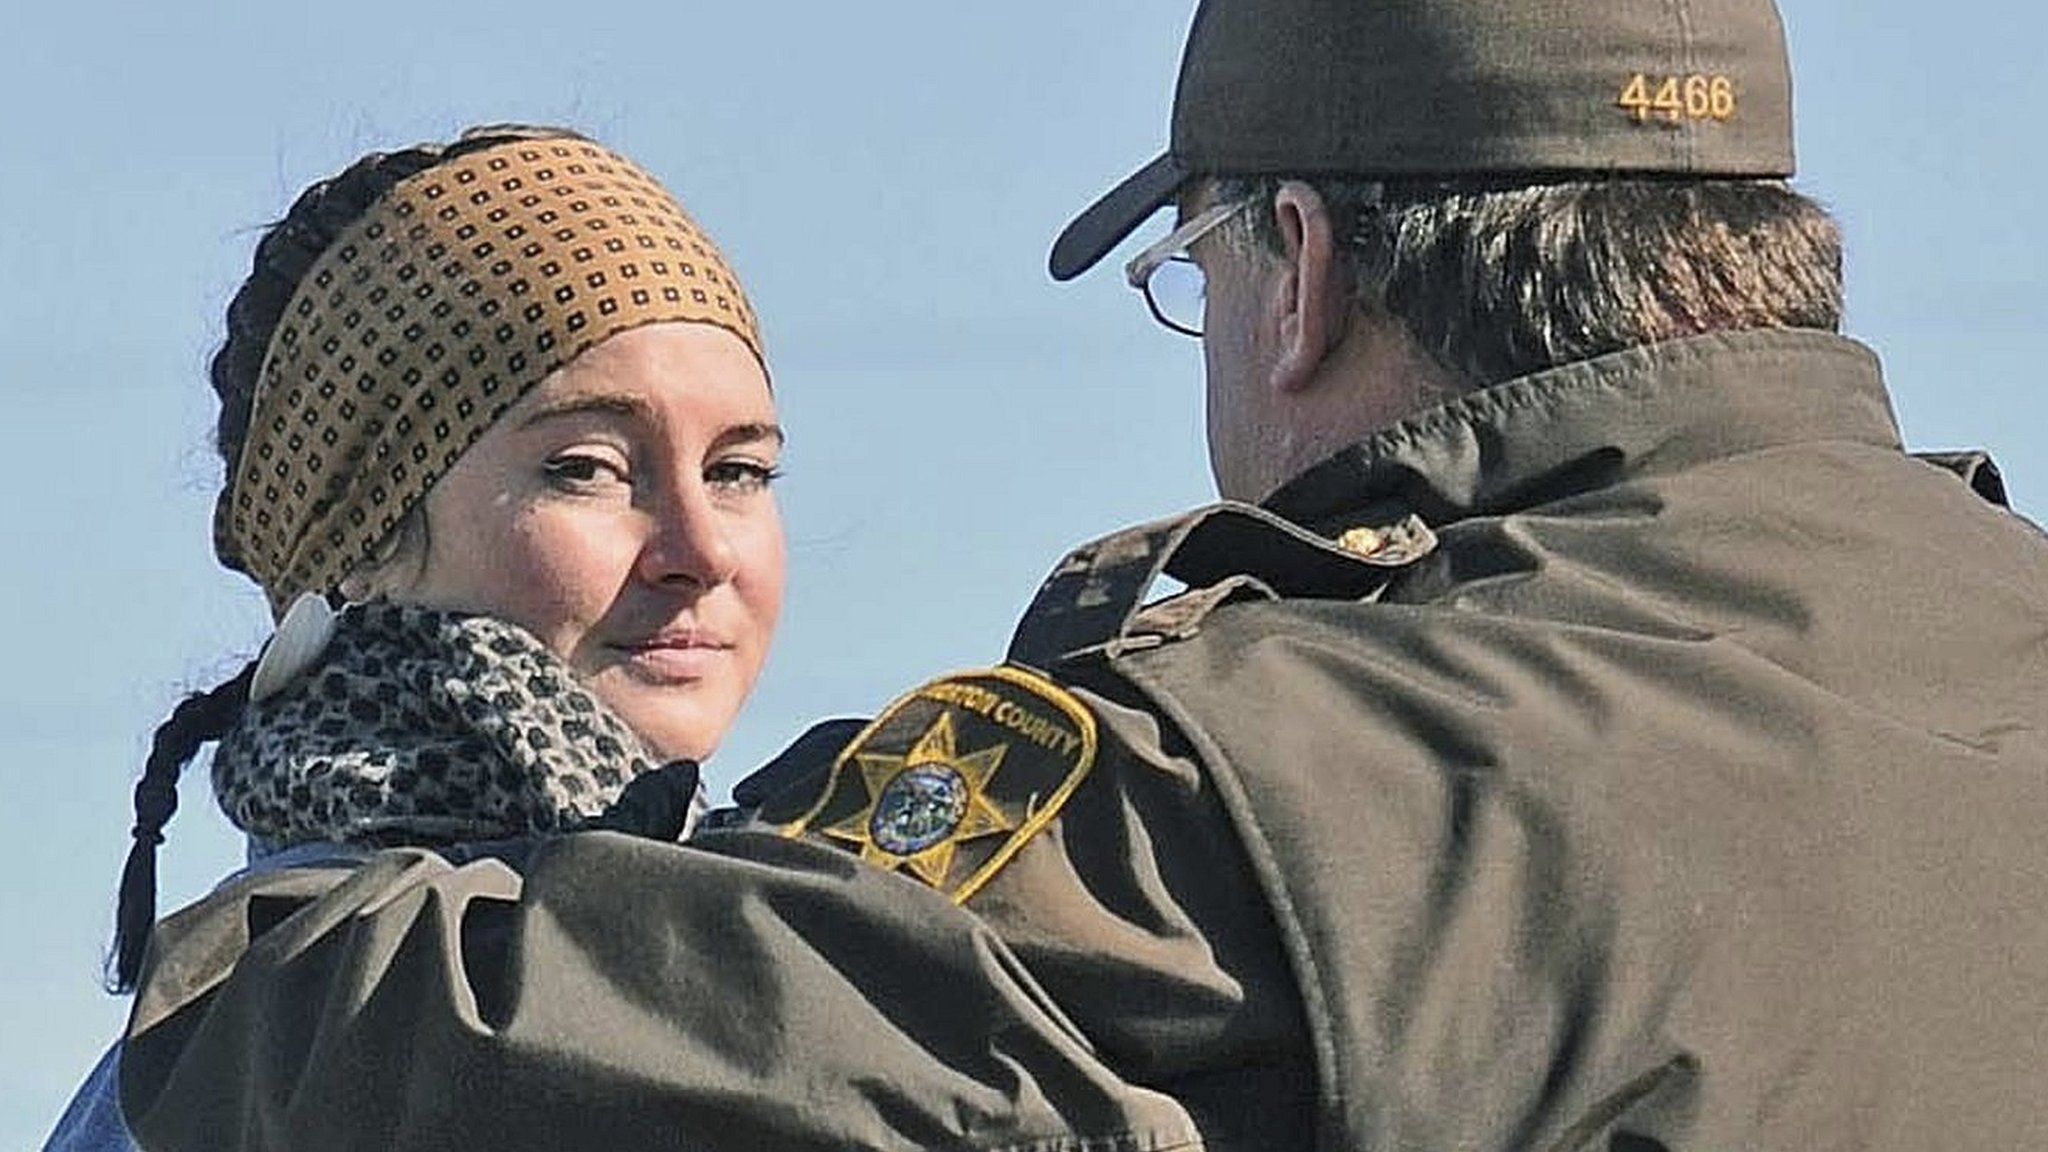 Shailene Woodley is arrested and led away in North Dakota. 10 Oct 2016